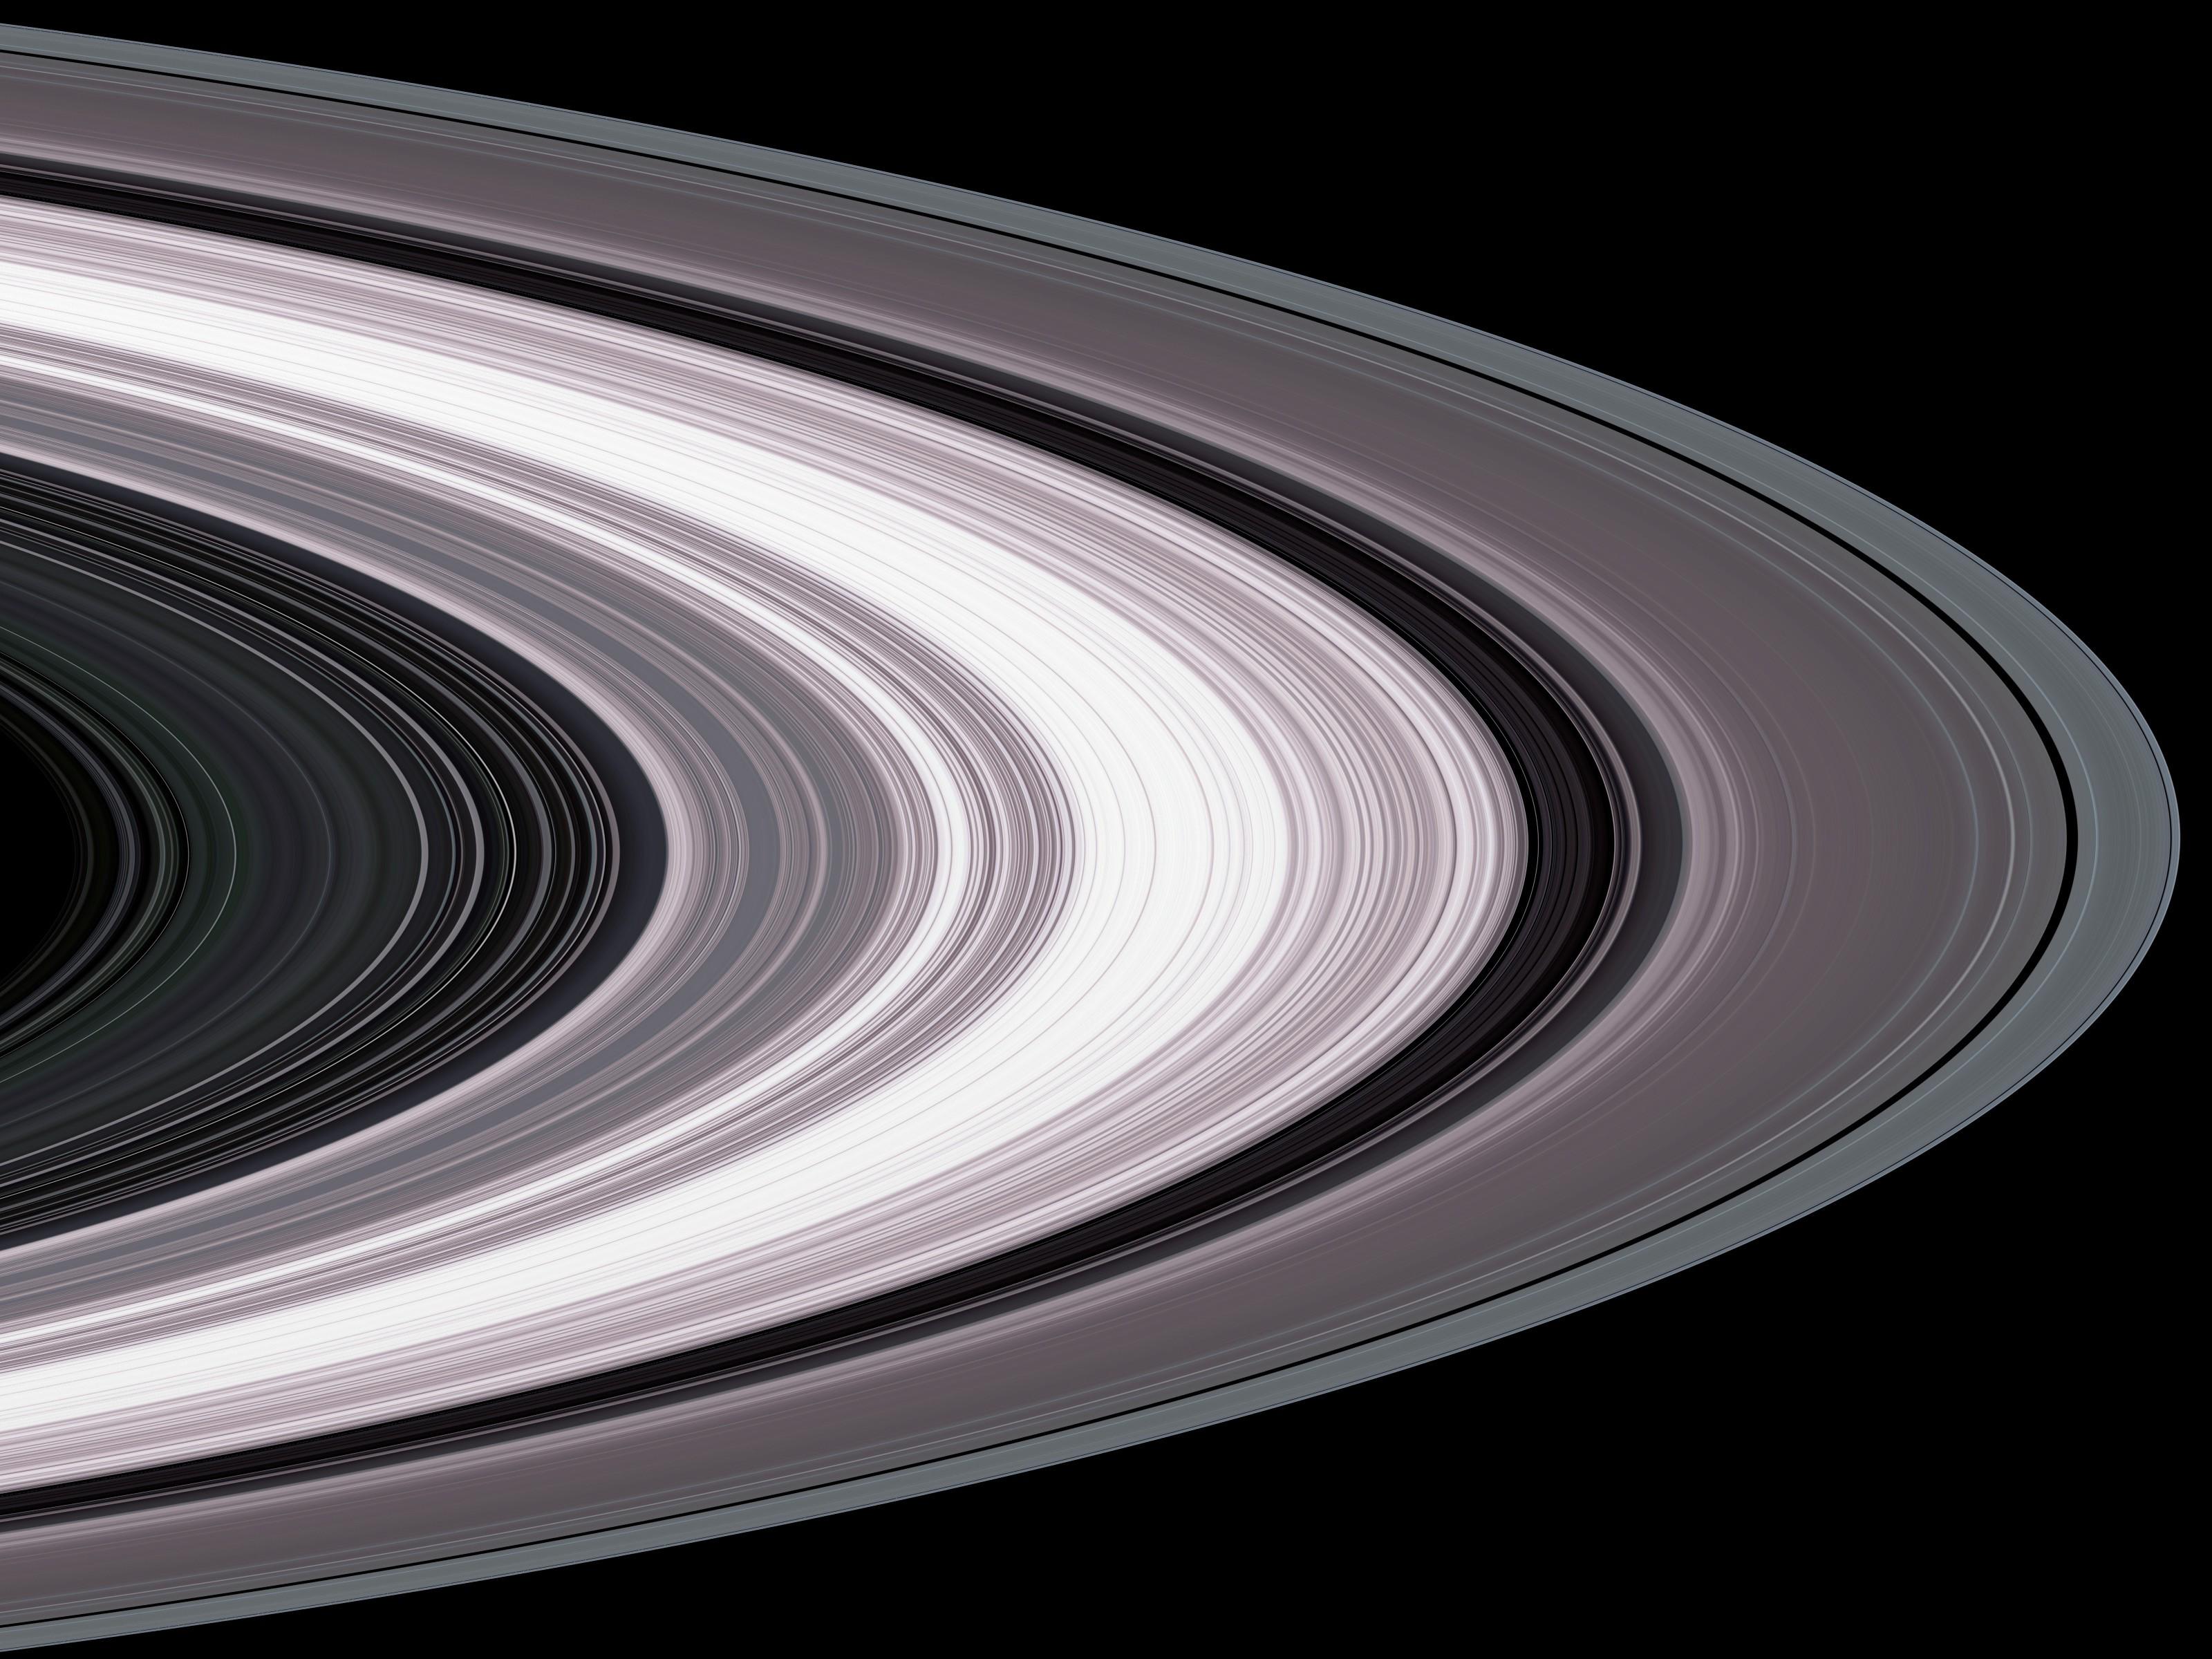 A simulated image of Saturn's rings